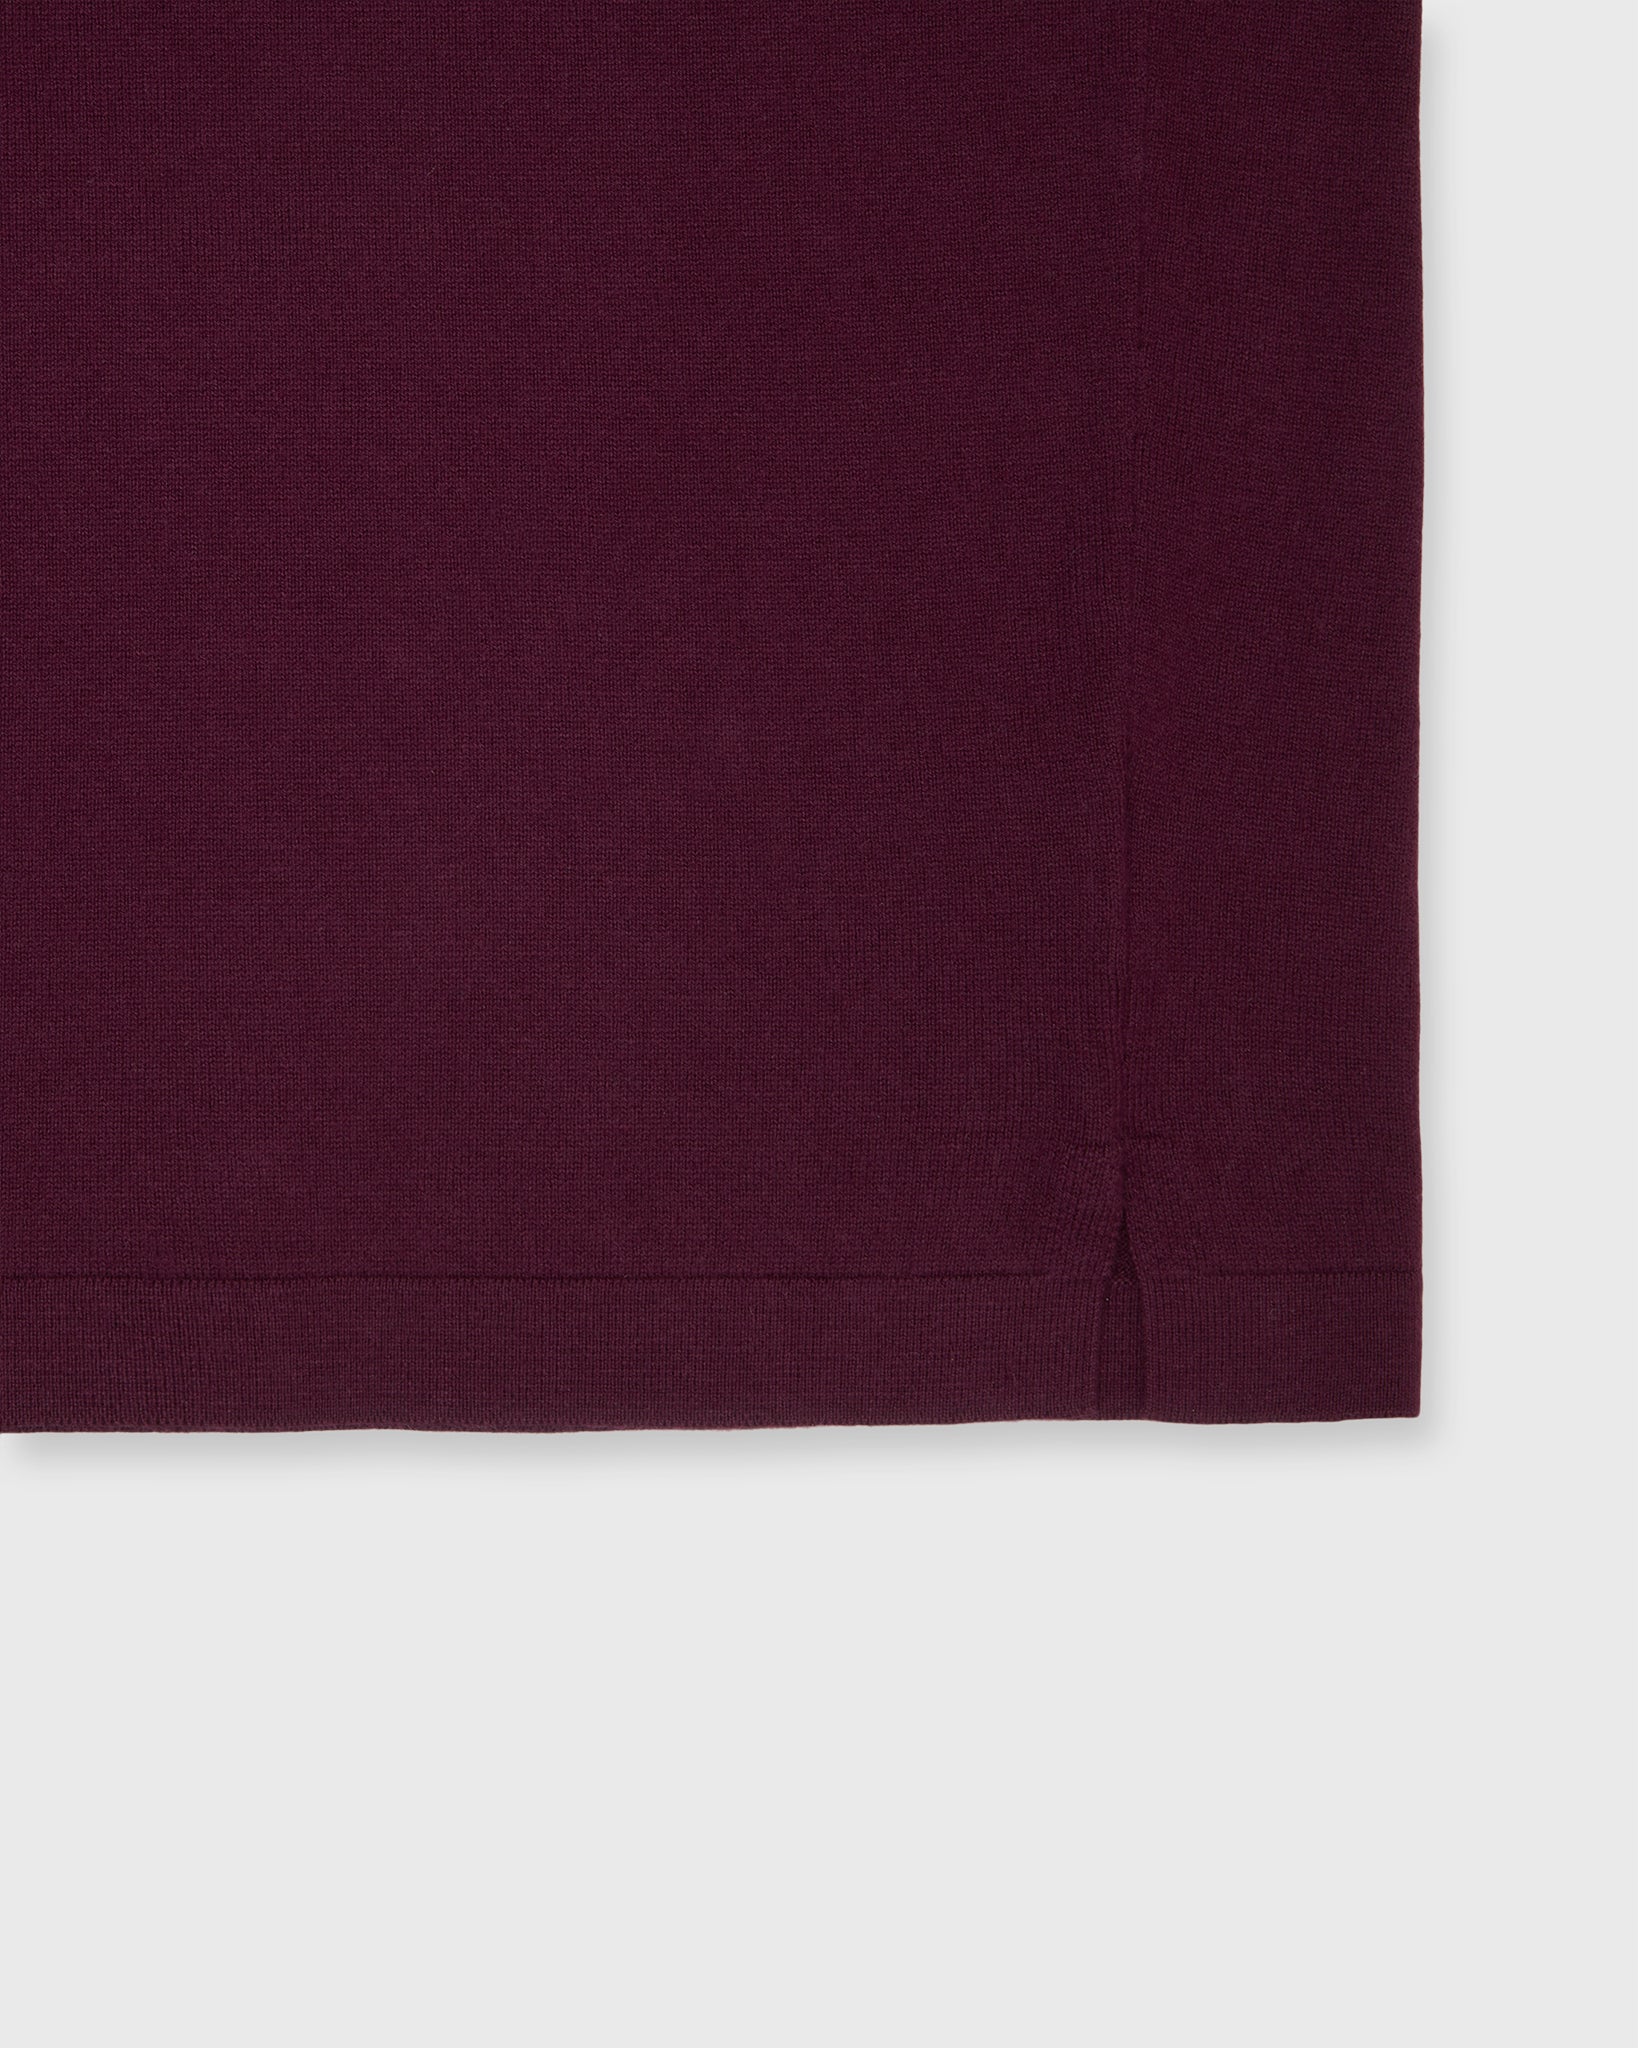 Long-Sleeved Rally Polo Sweater in Plum Cotton/Cashmere